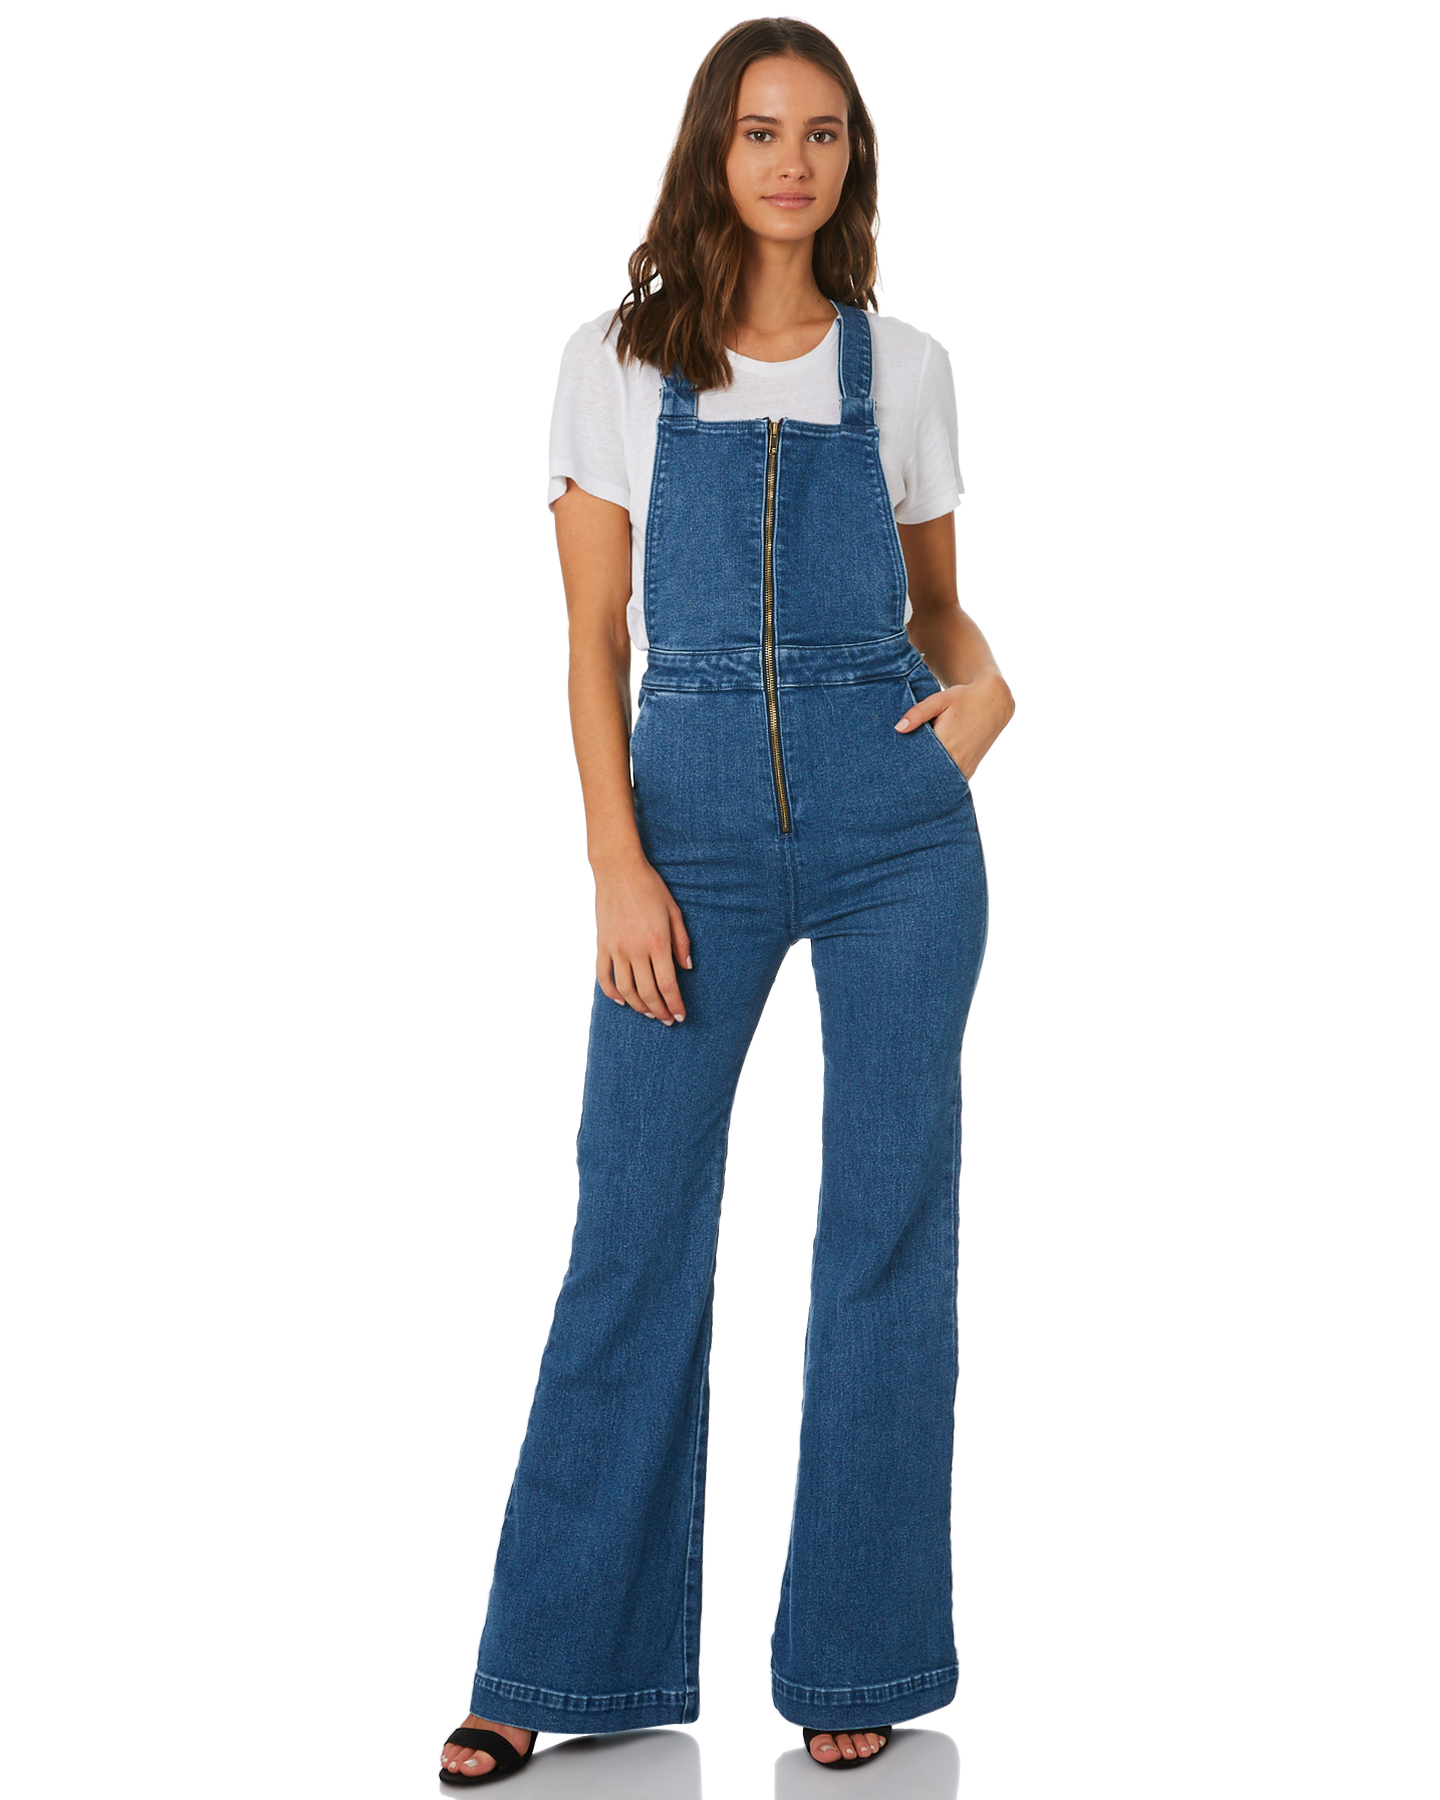 Rollas Eastcoast Flare Overall - Eco Judy Blue | SurfStitch